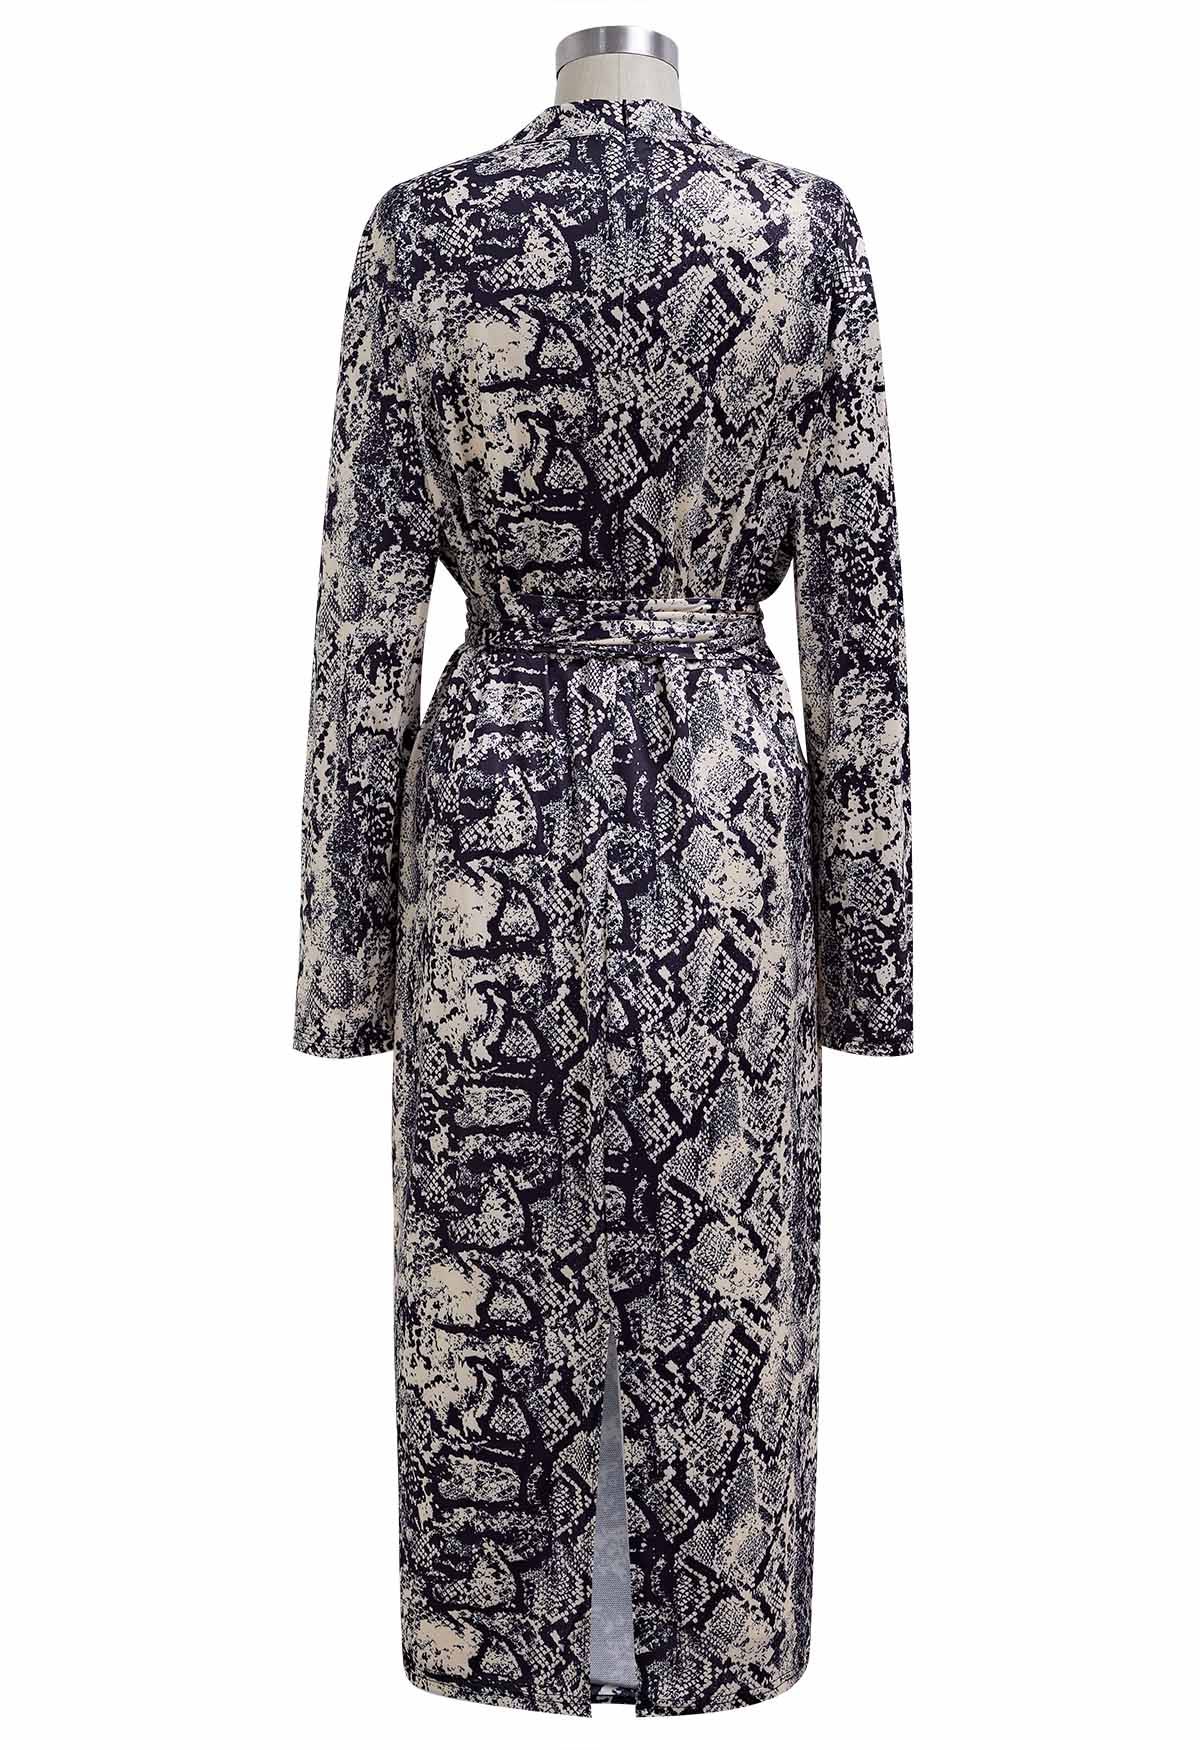 Snake Print Tie Waist Wrapped Dress - Retro, Indie and Unique Fashion